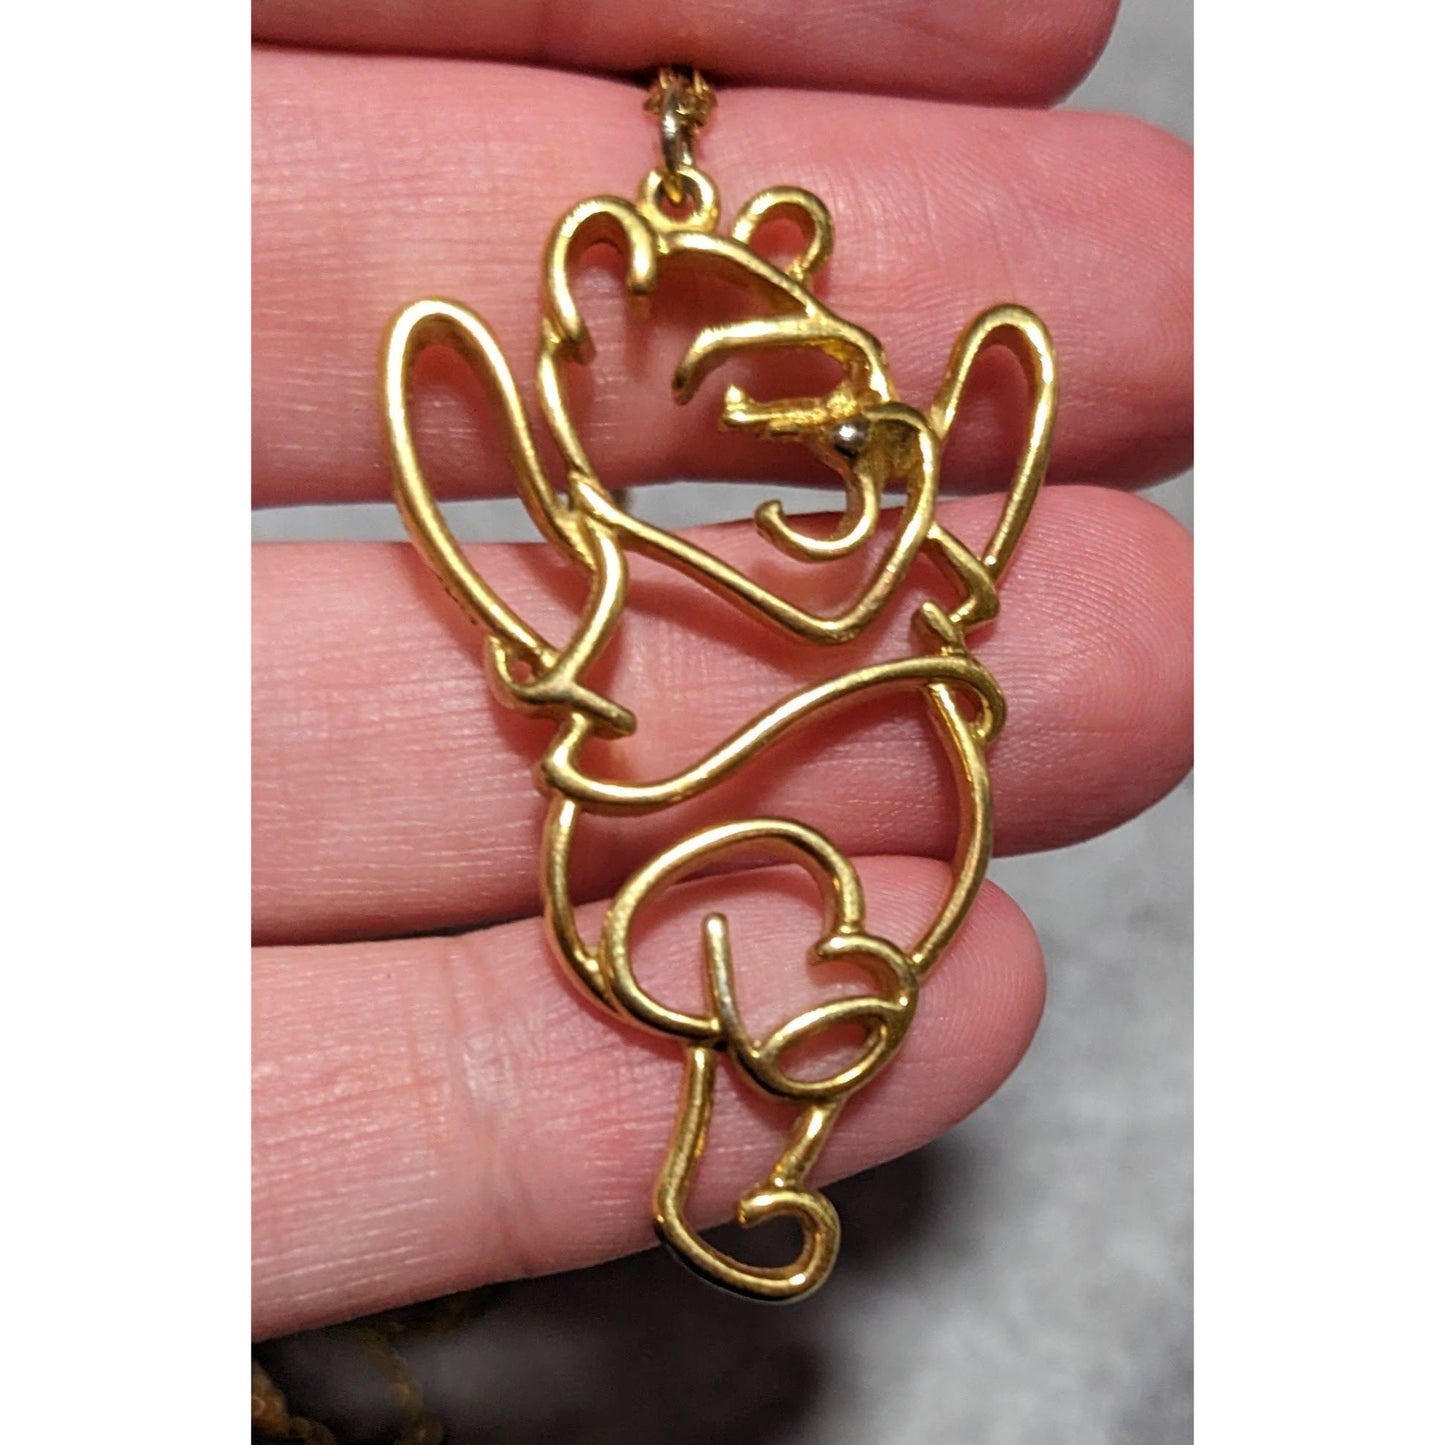 Gold Winnie The Pooh Necklace